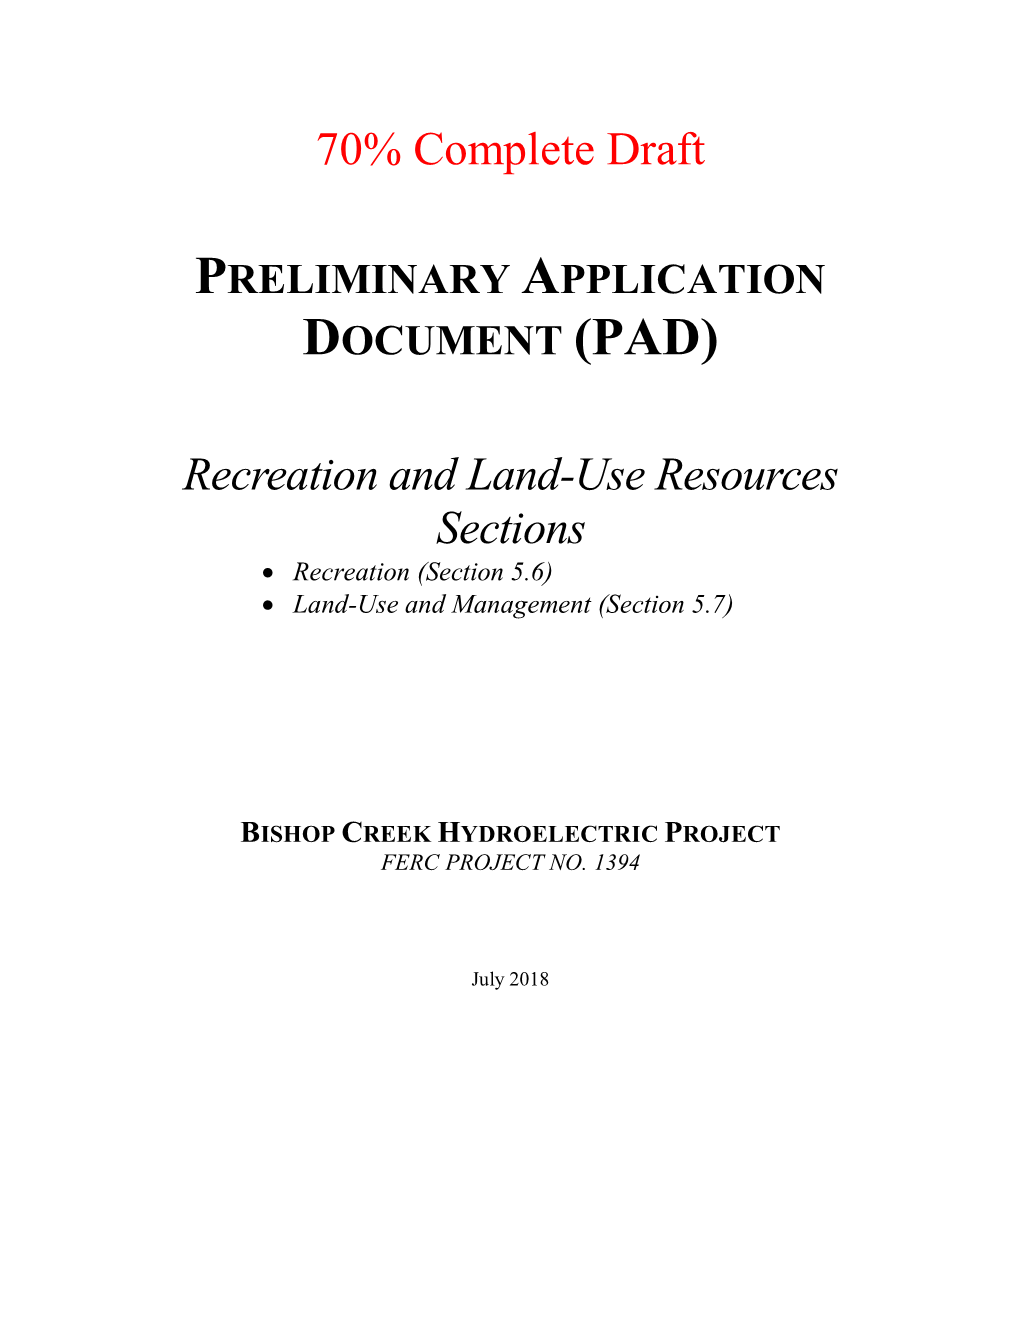 70% Complete Draft Recreation and Land-Use Resources Sections